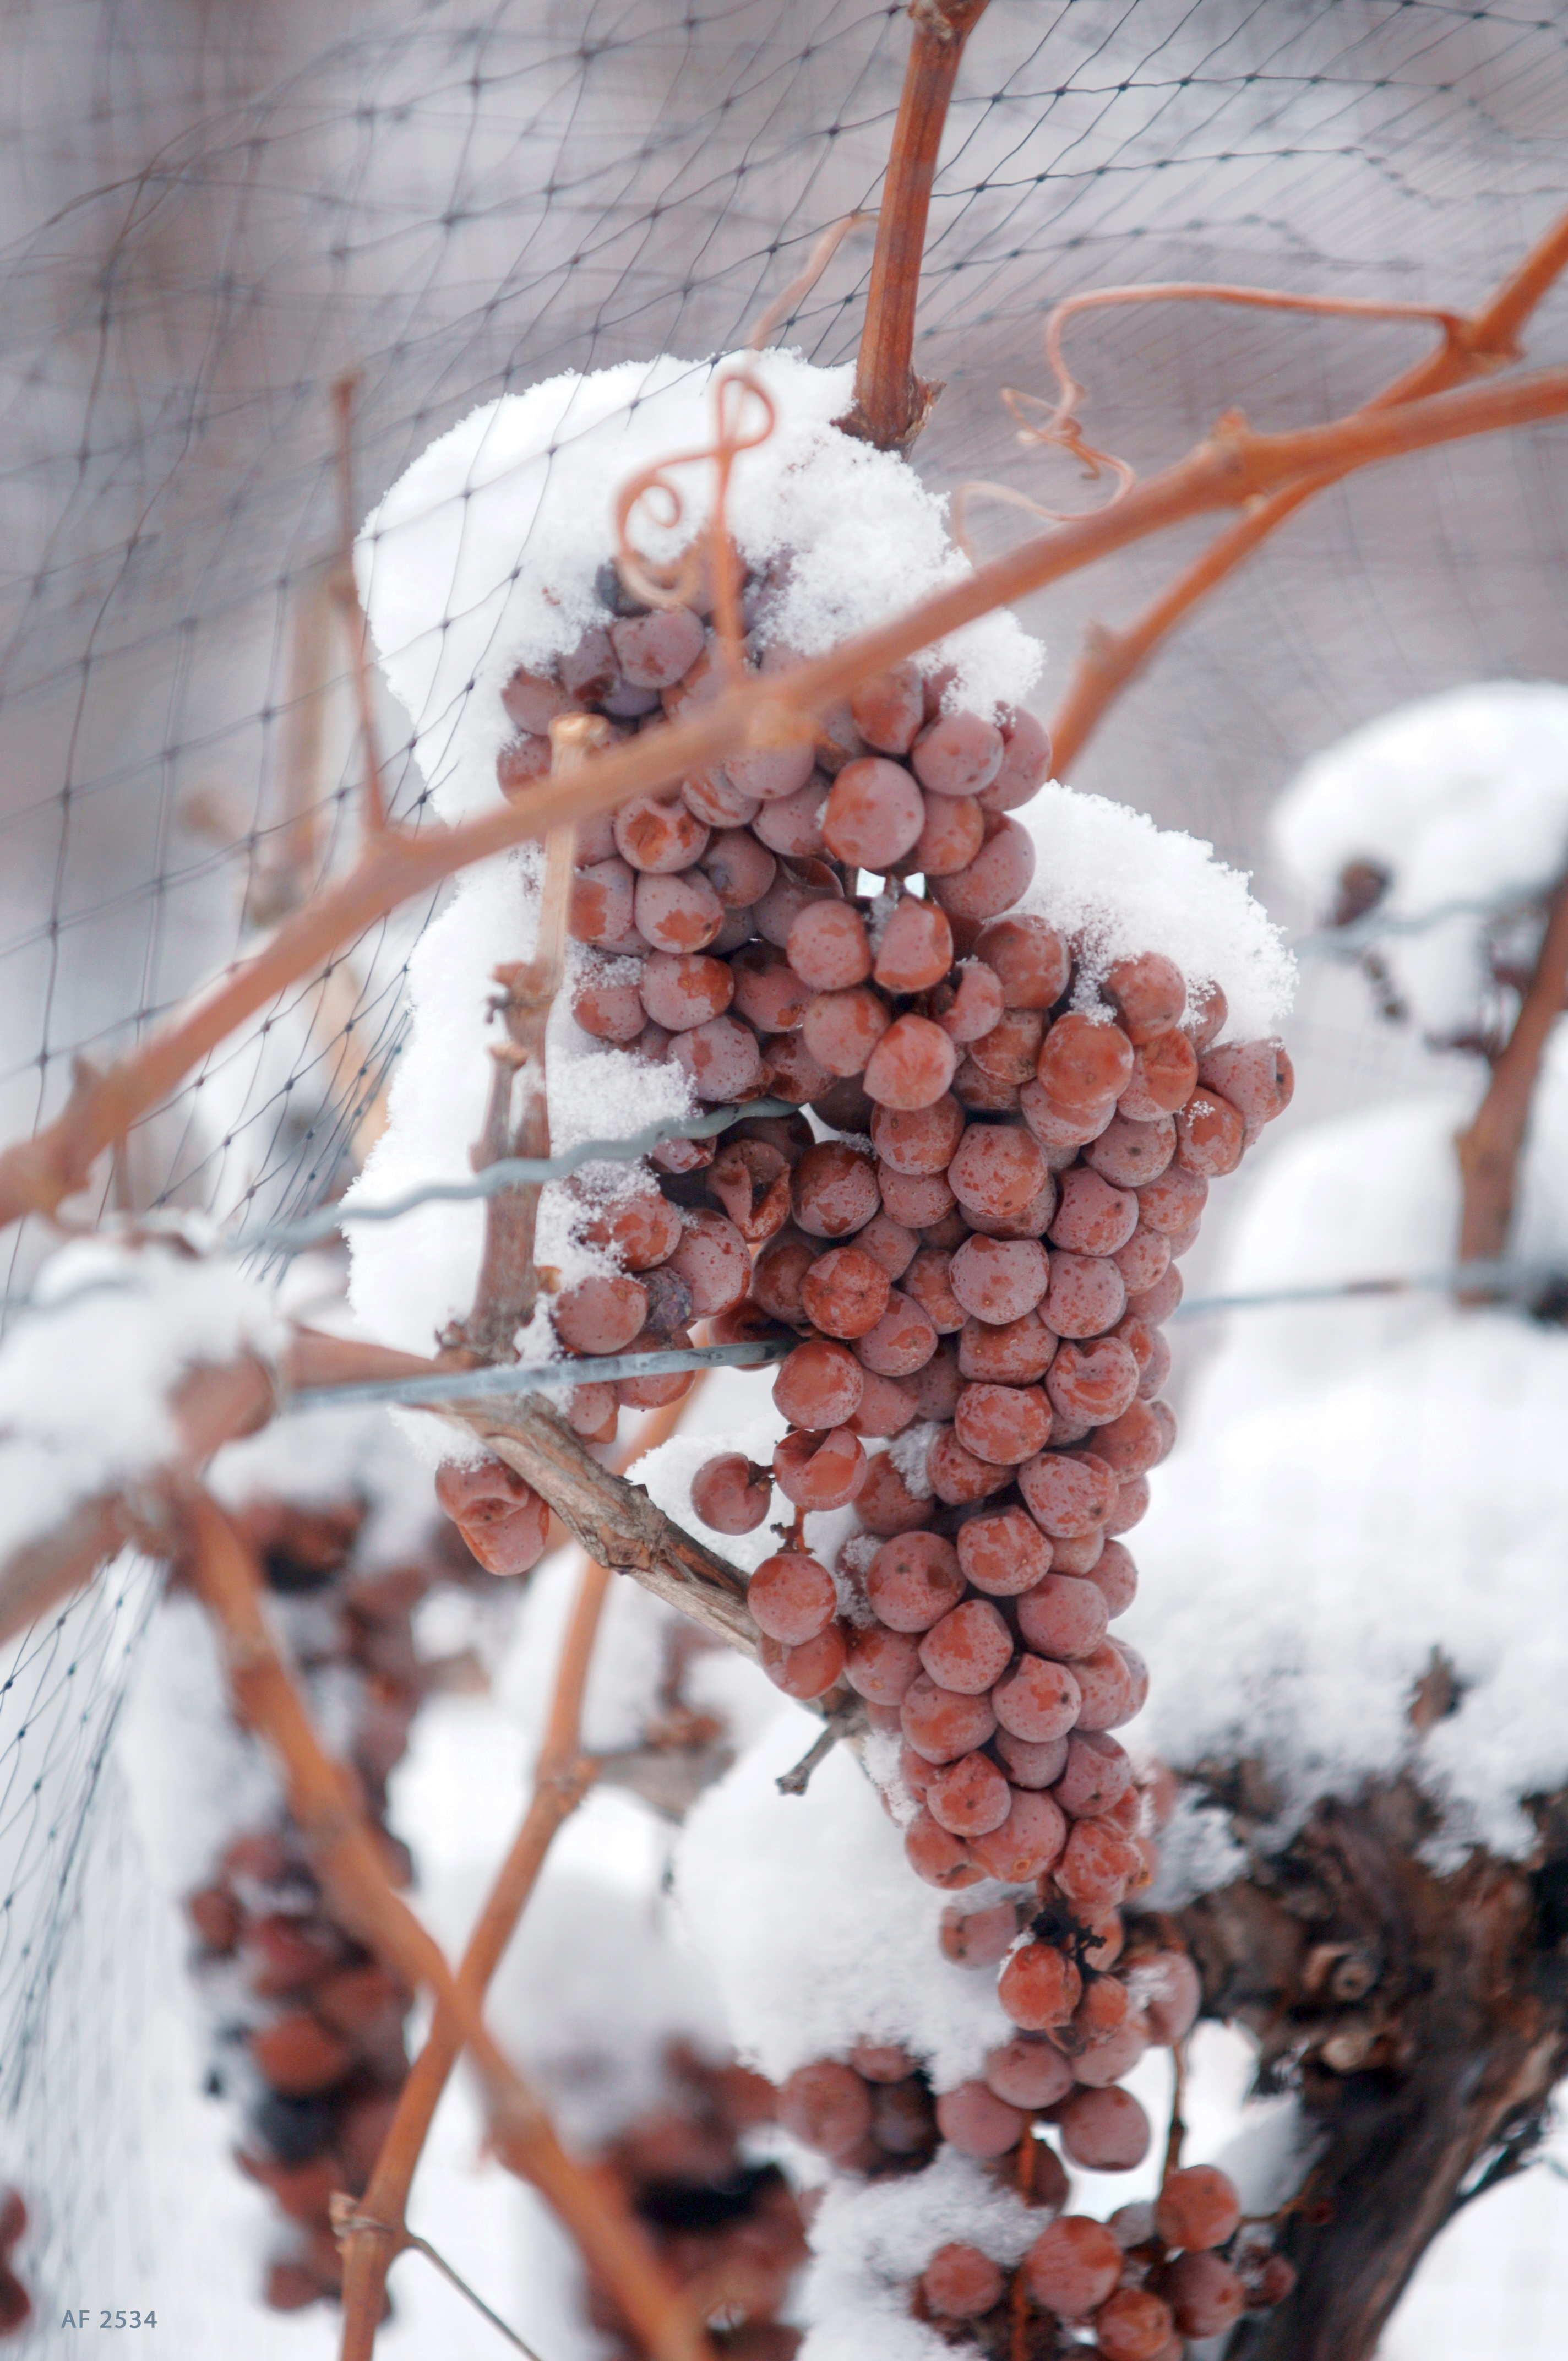 Icewine grapes in this file photo.